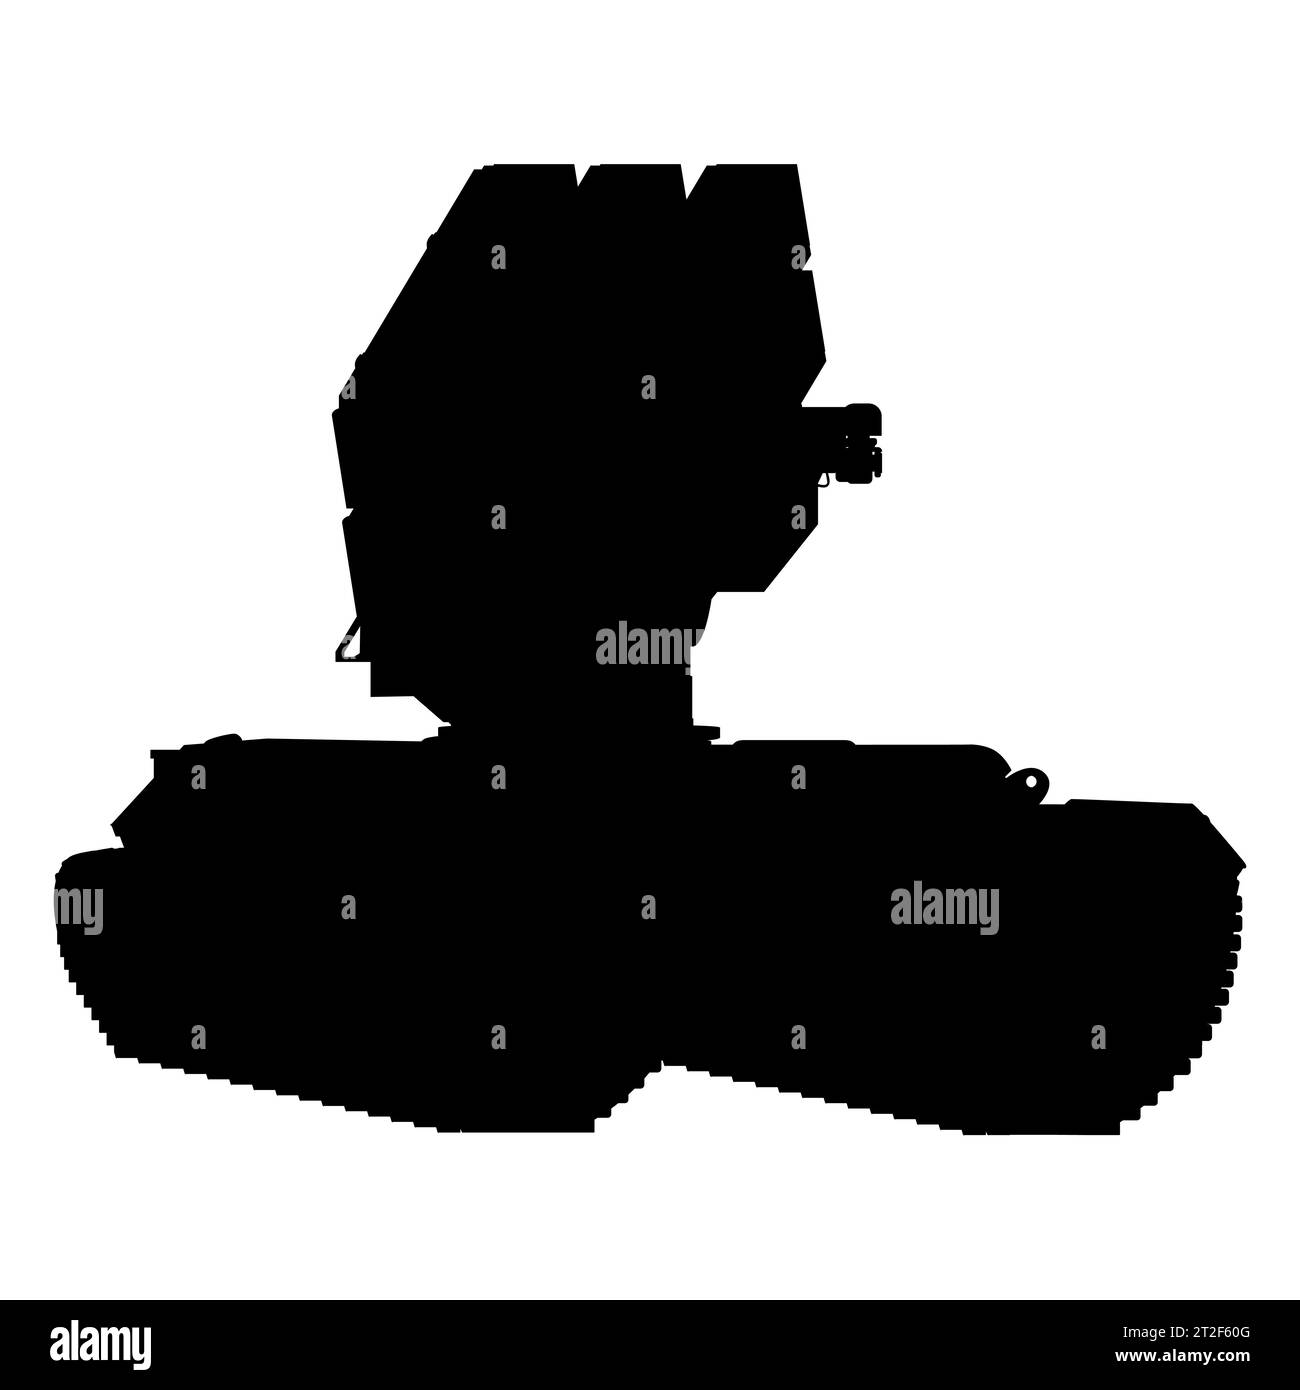 Self-propelled Anti - aircraft air defense system silhouette. Vector illustration isolated on white background. Stock Vector